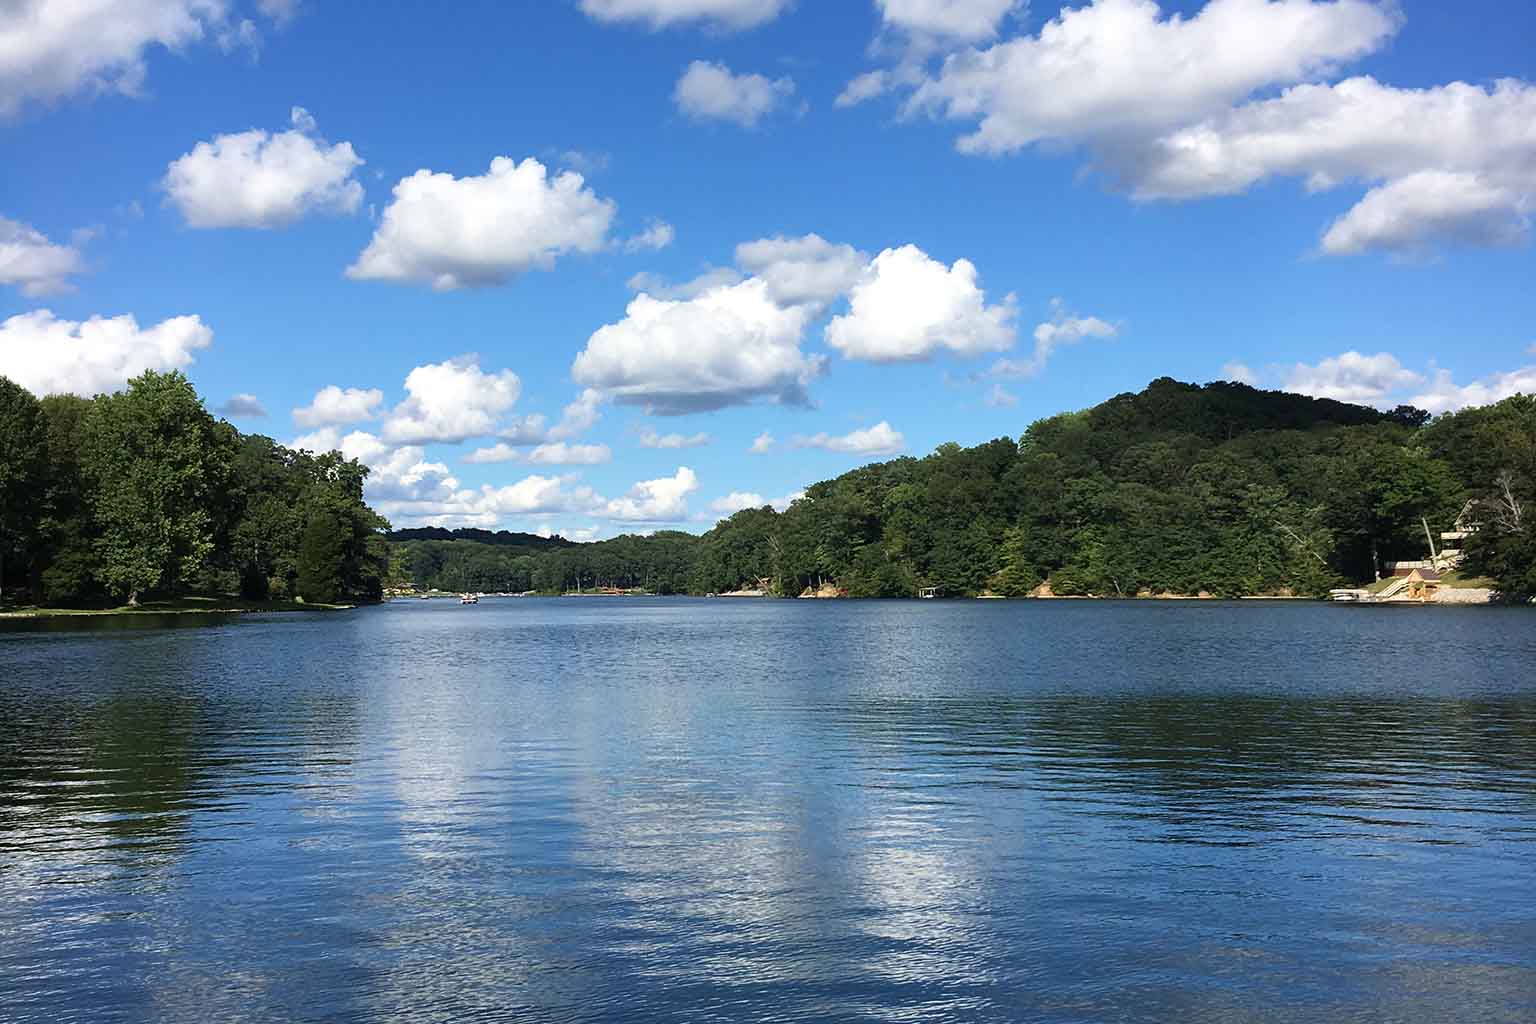 Blue skies and greenery surround a placid lake